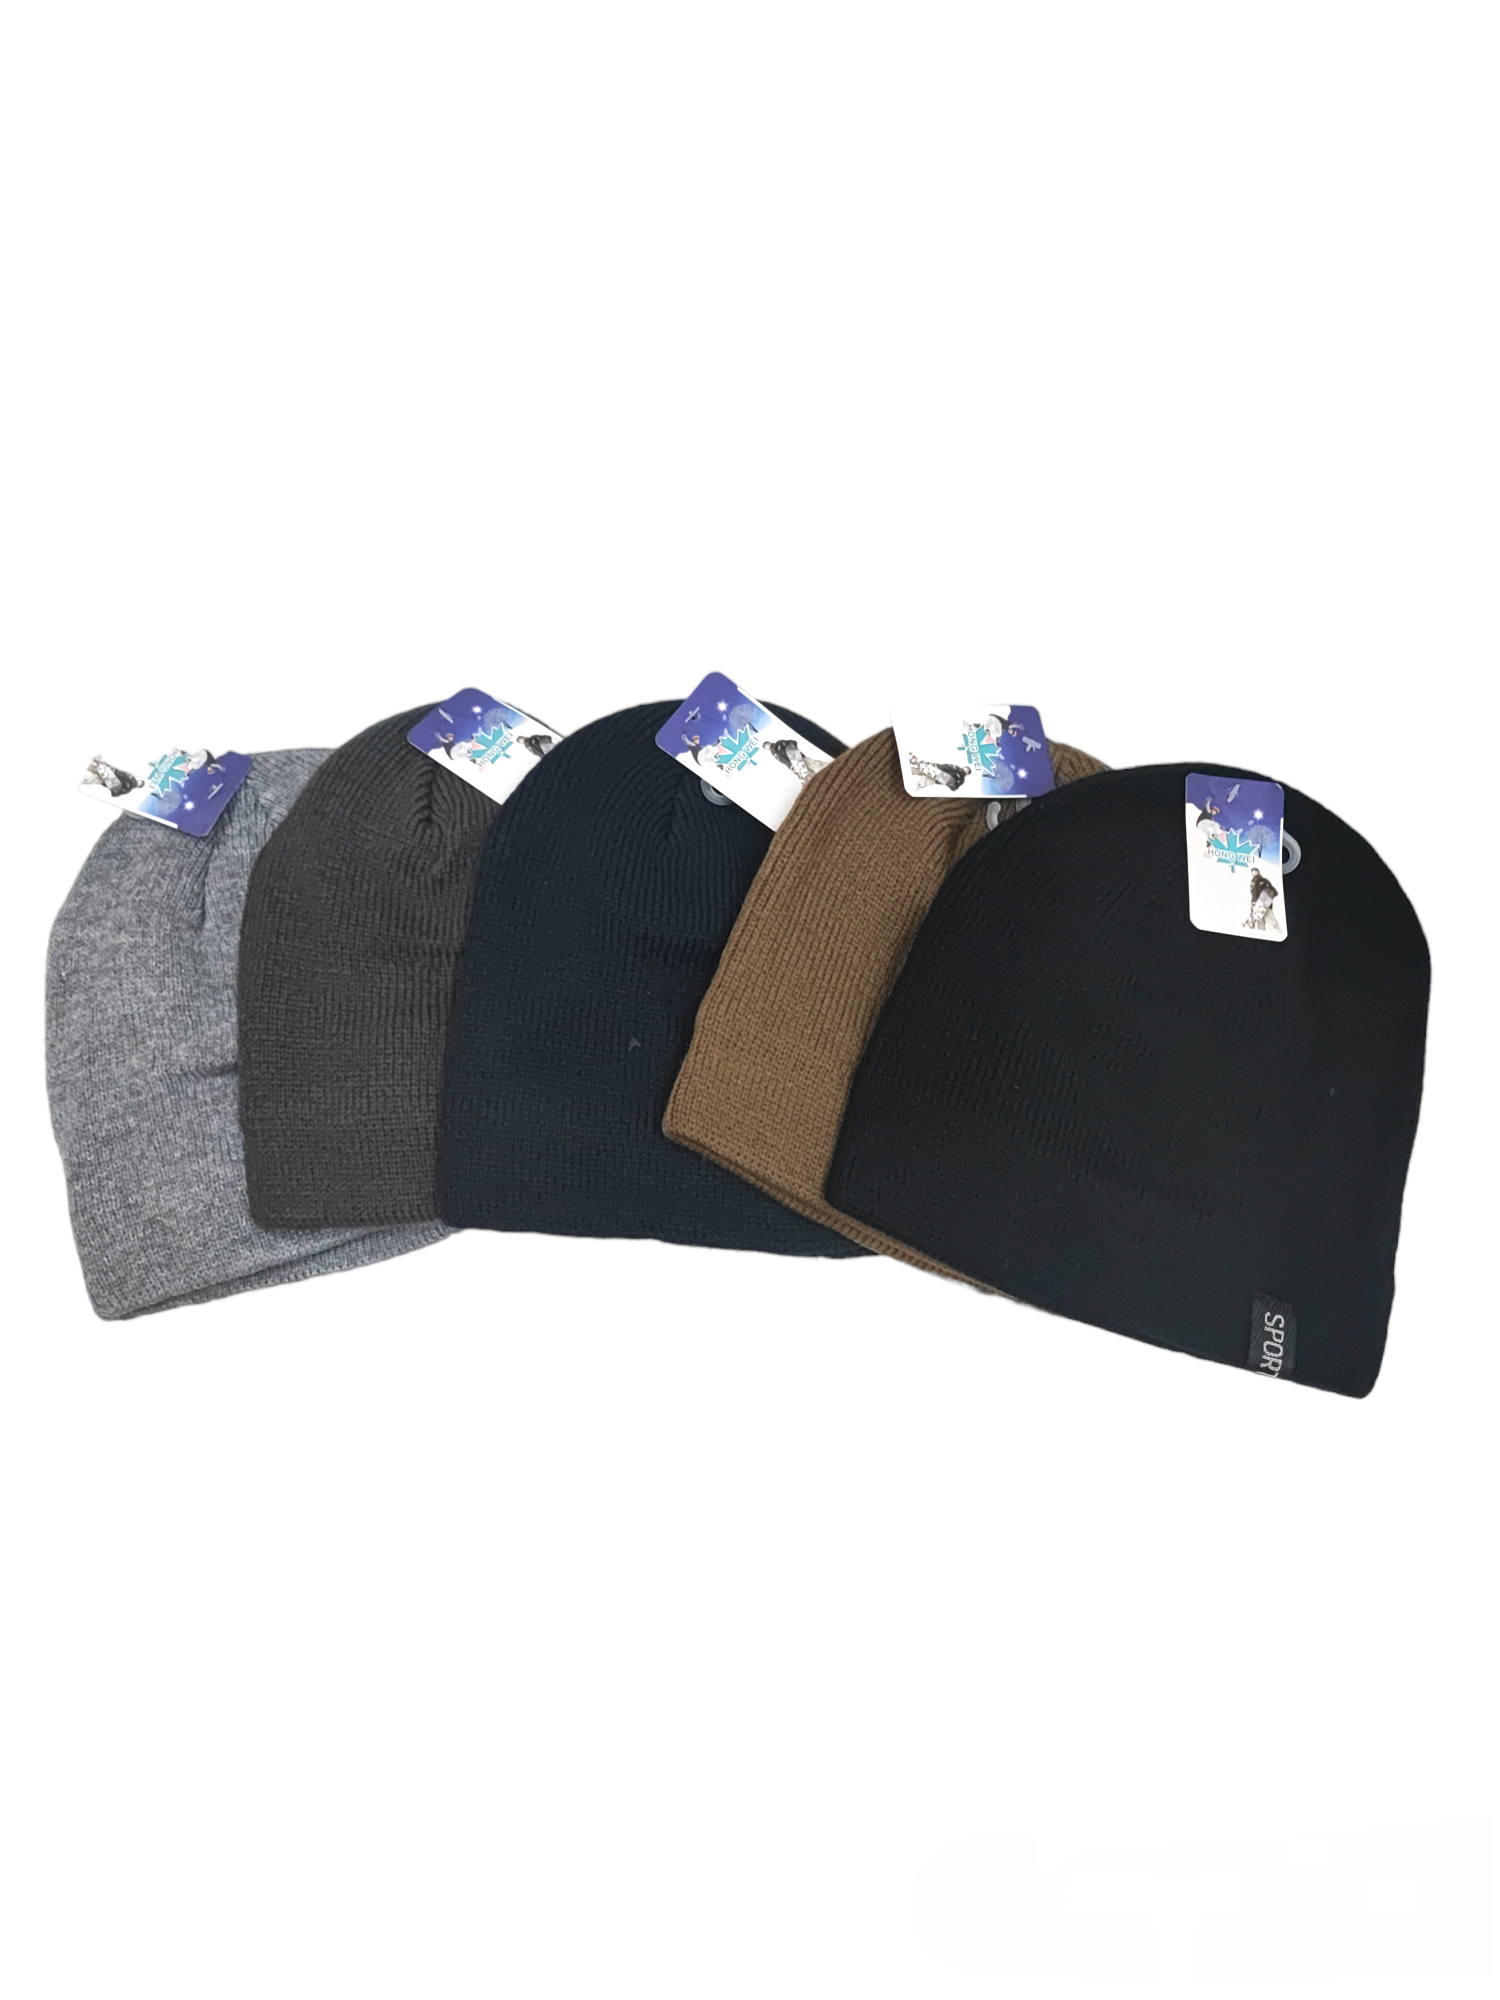 Fleece hat with sports writing detail (x12)#5